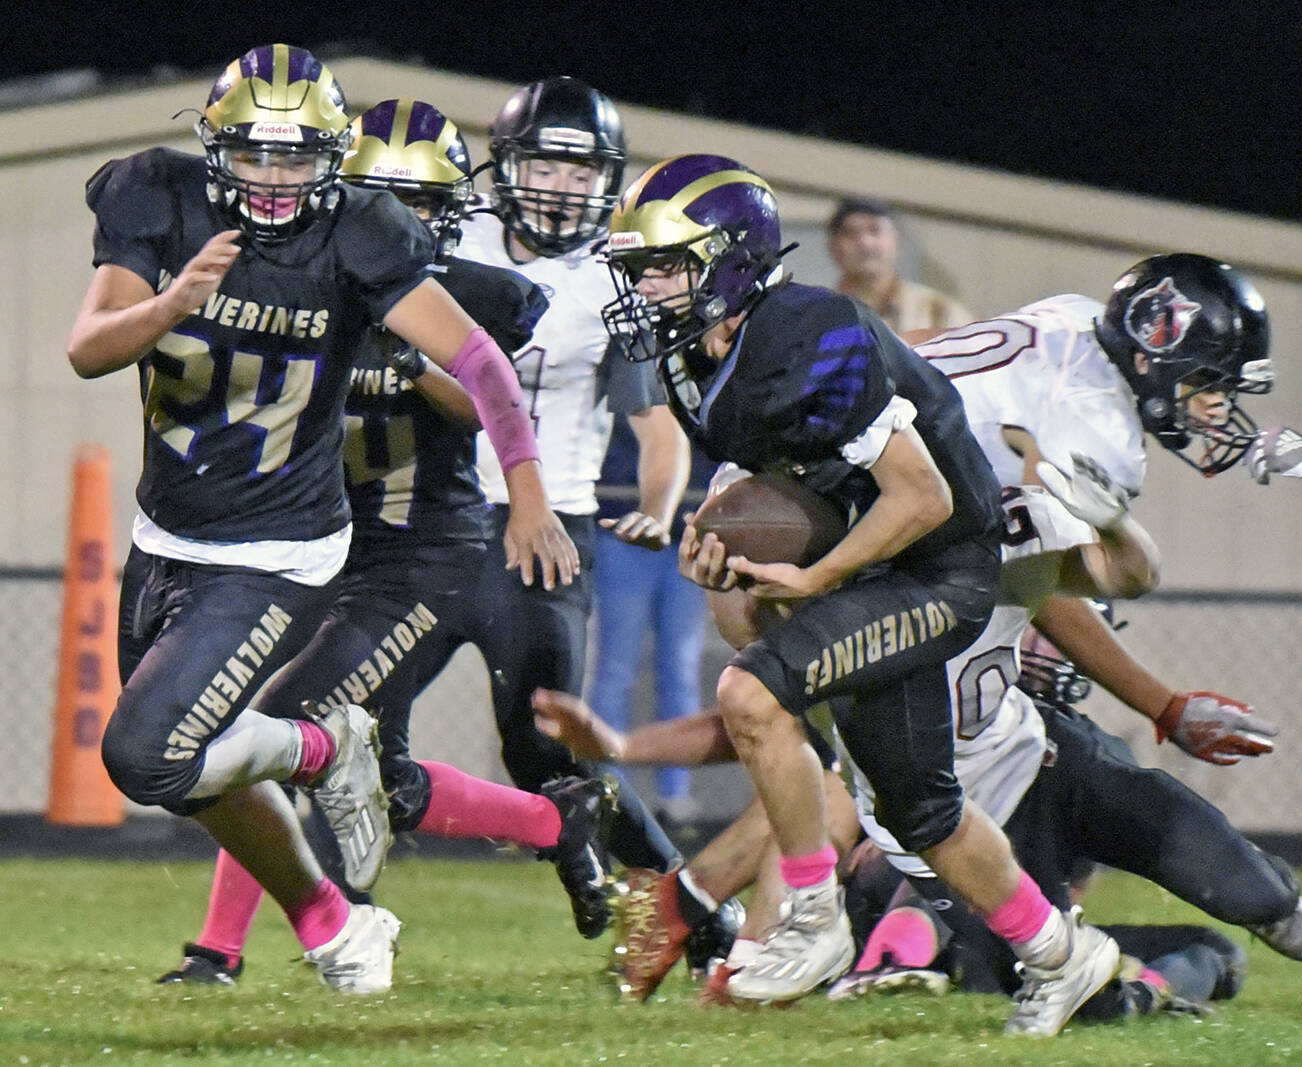 Wolverine Connor Haines, #14, cuts upfield for more yardage, with Chris Gustafson, #24, clearing the way. (John Stimpson)